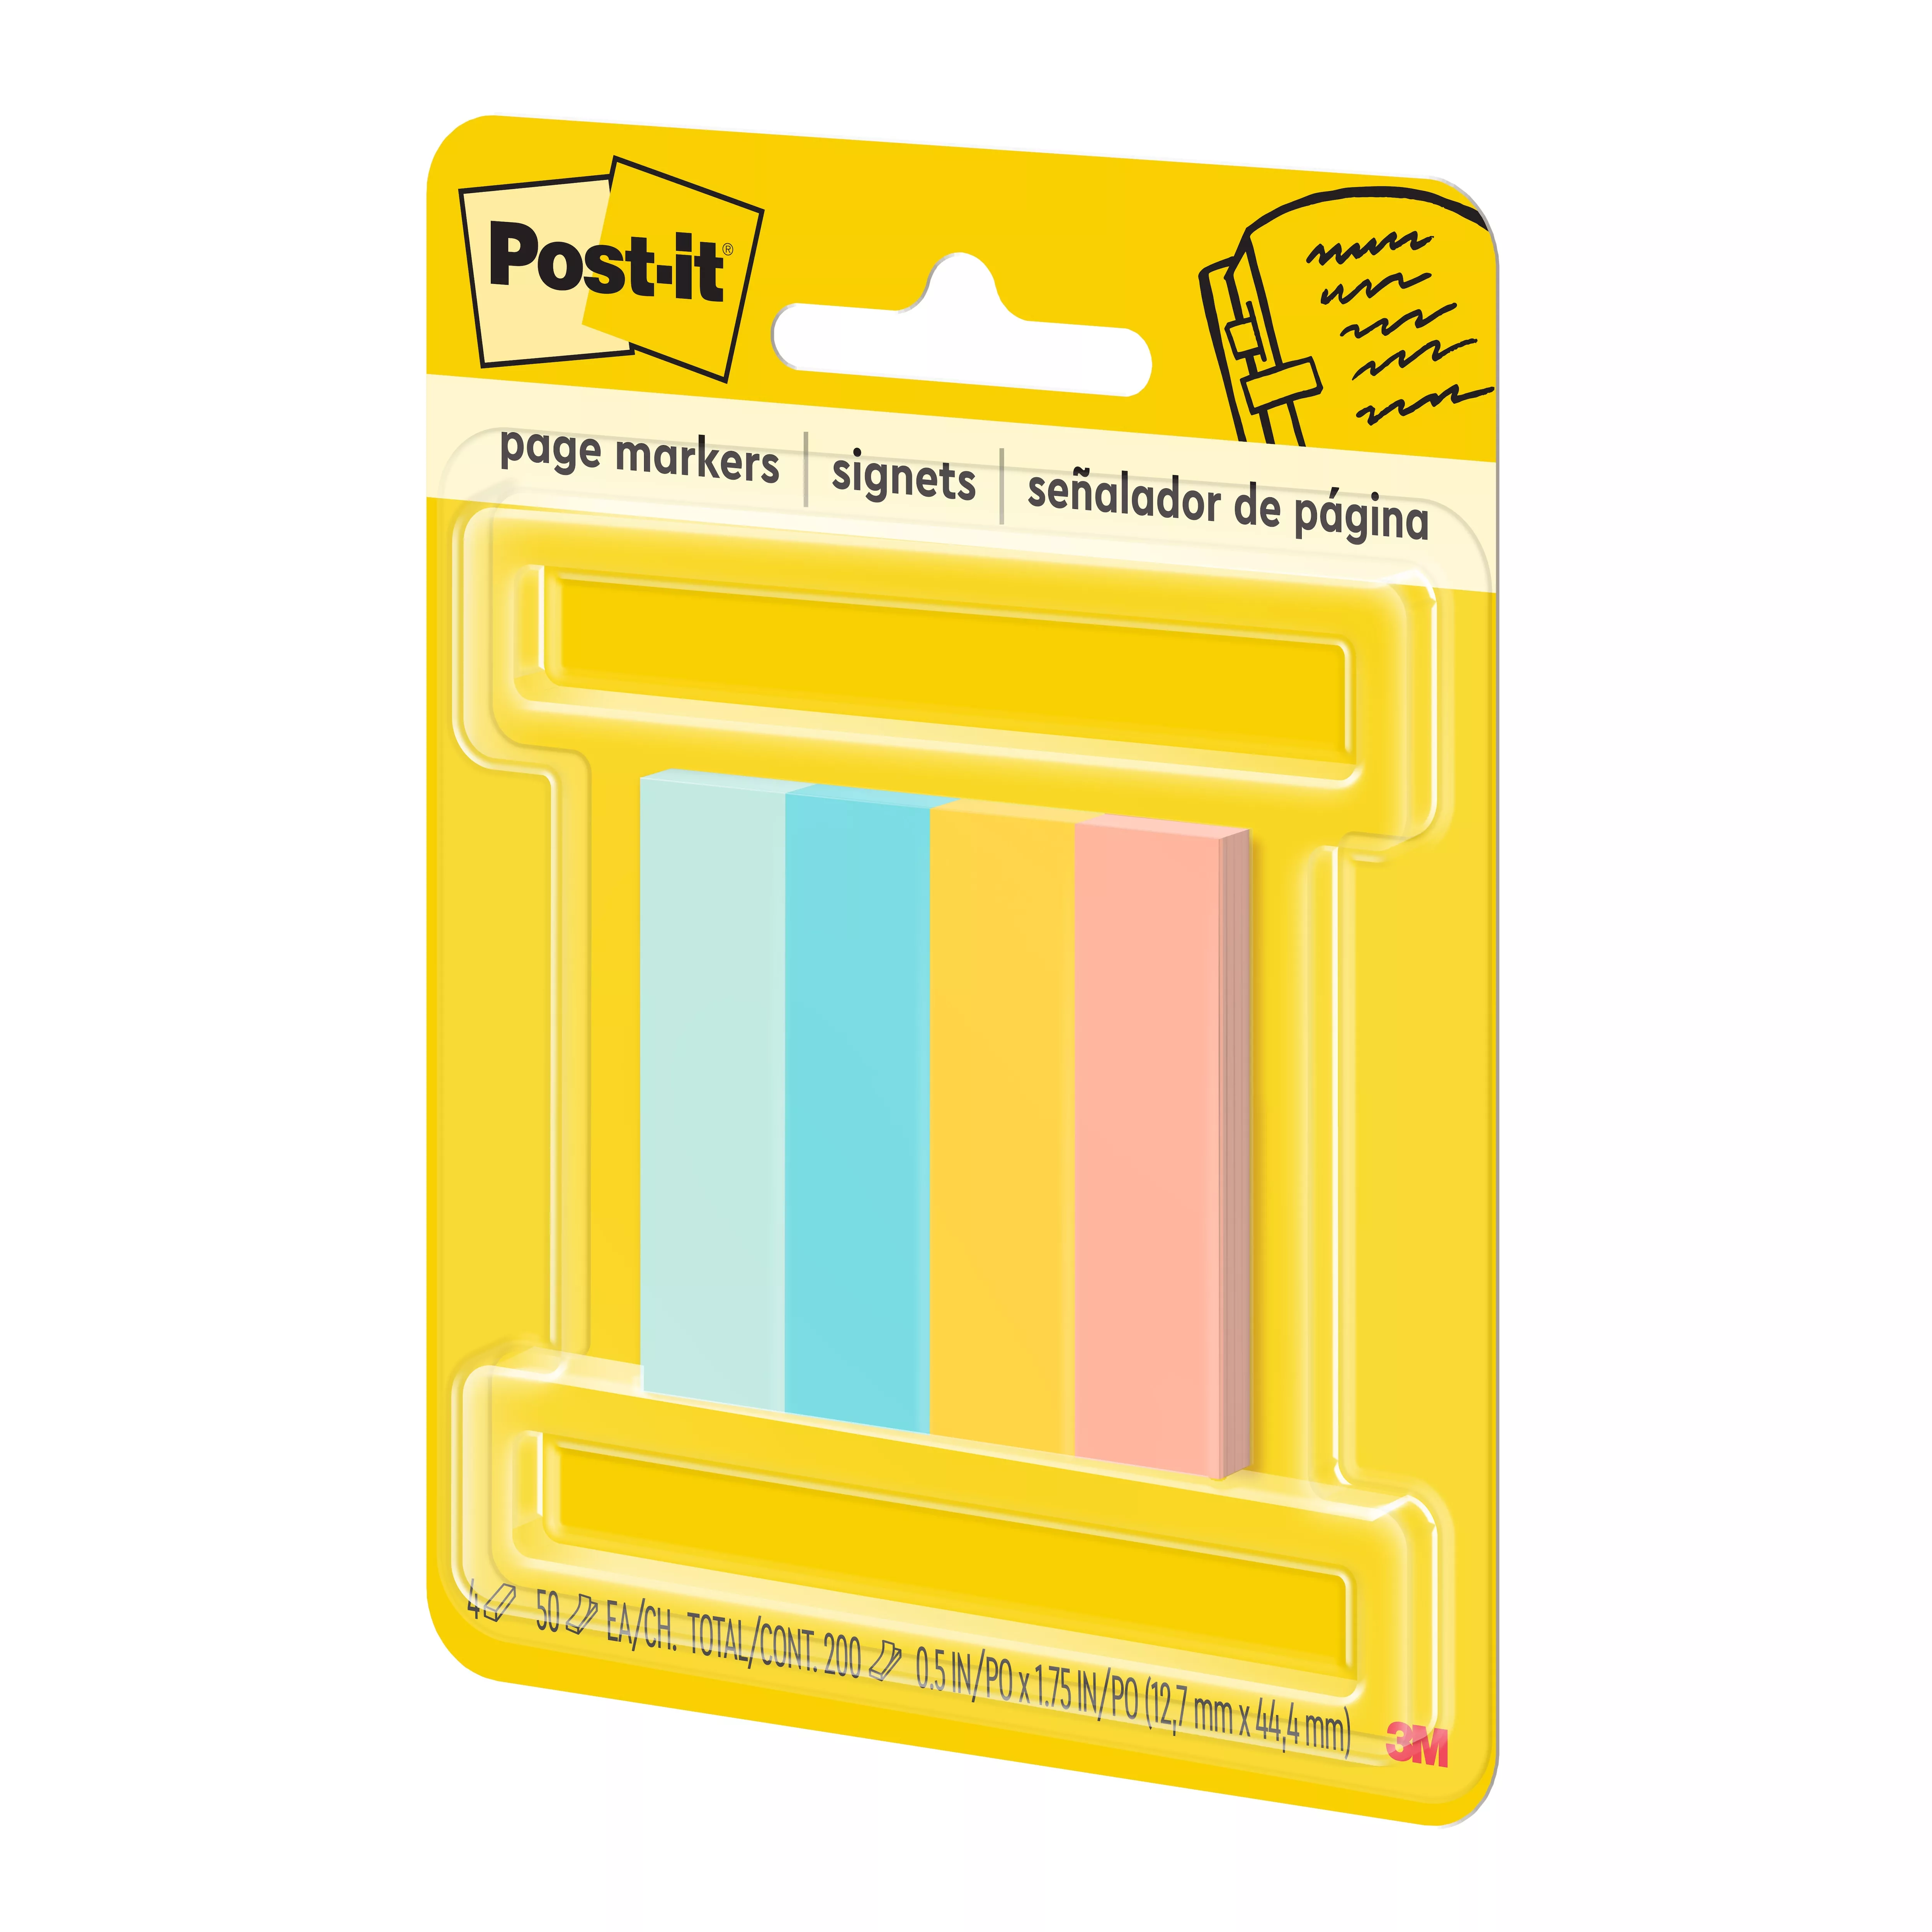 UPC 00051141321622 | Post-it® Page Marker 670-4-D